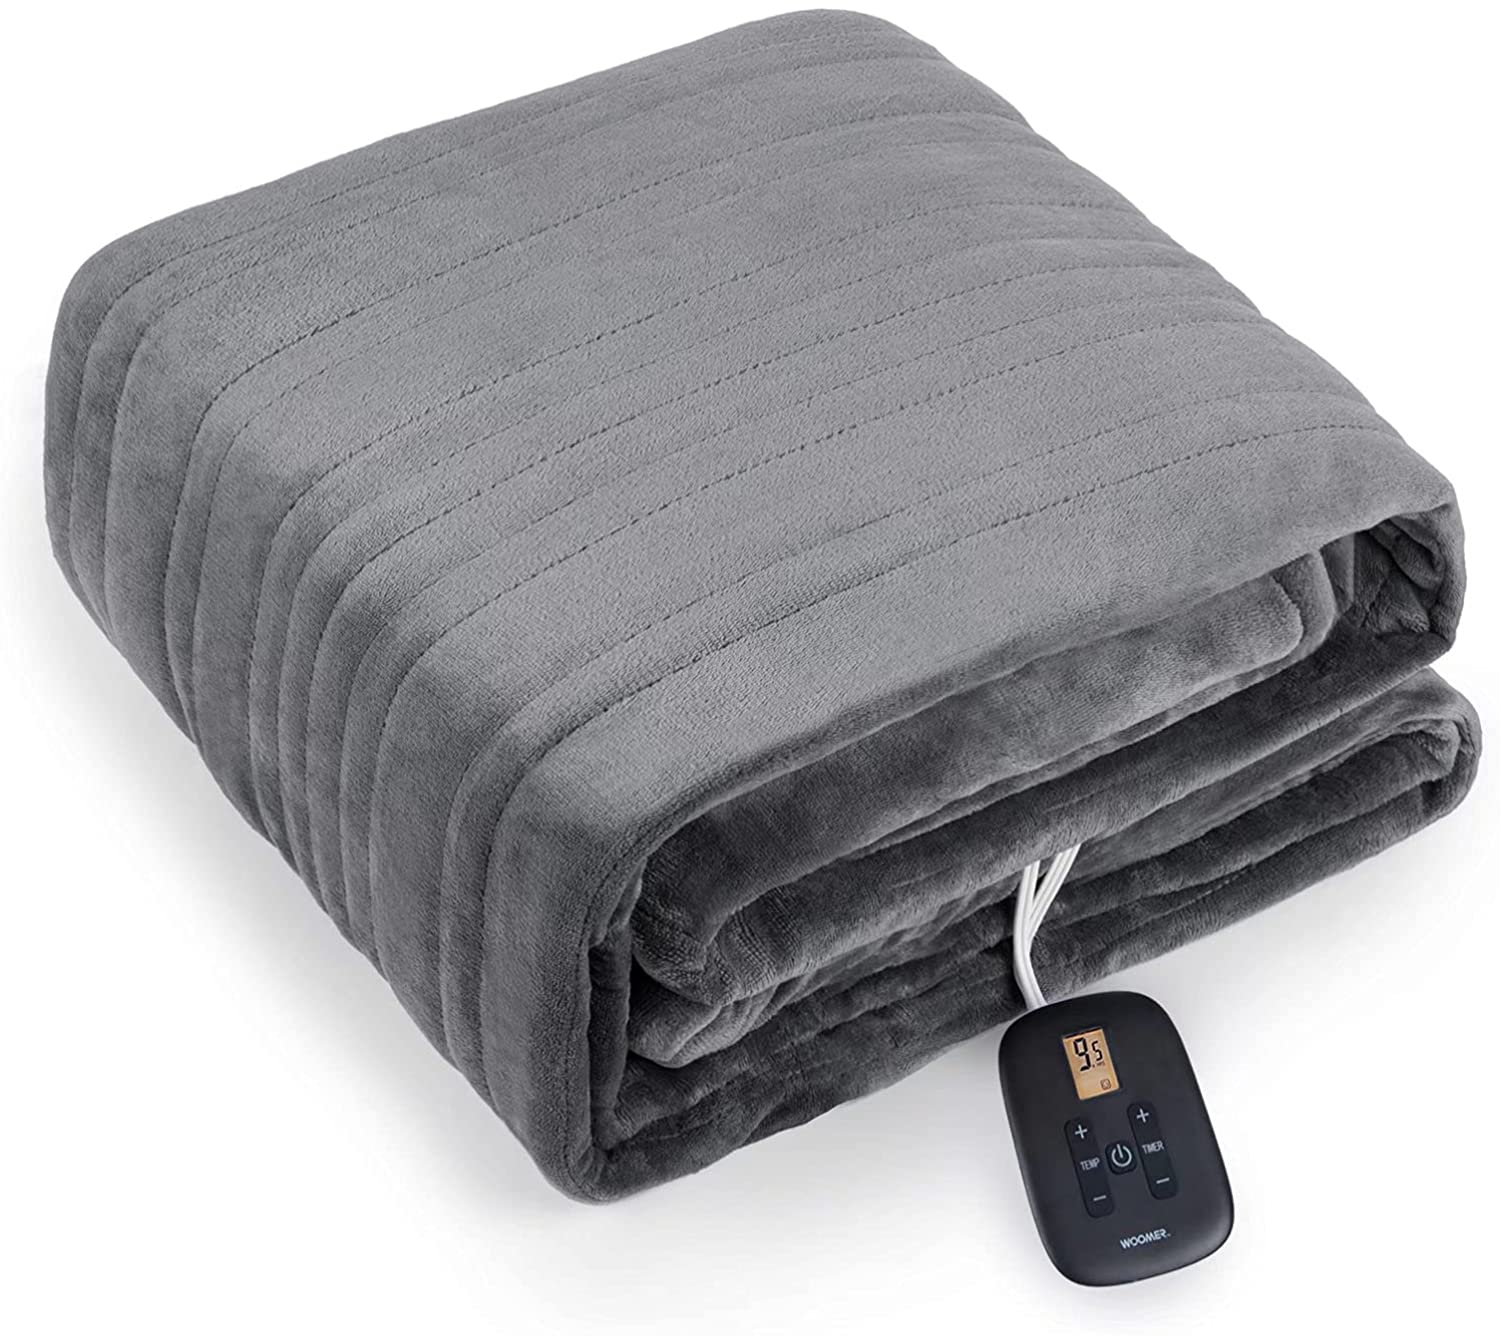 Electric Heating Blanket - Flannel Sherpa - Gray - 62"x 84"